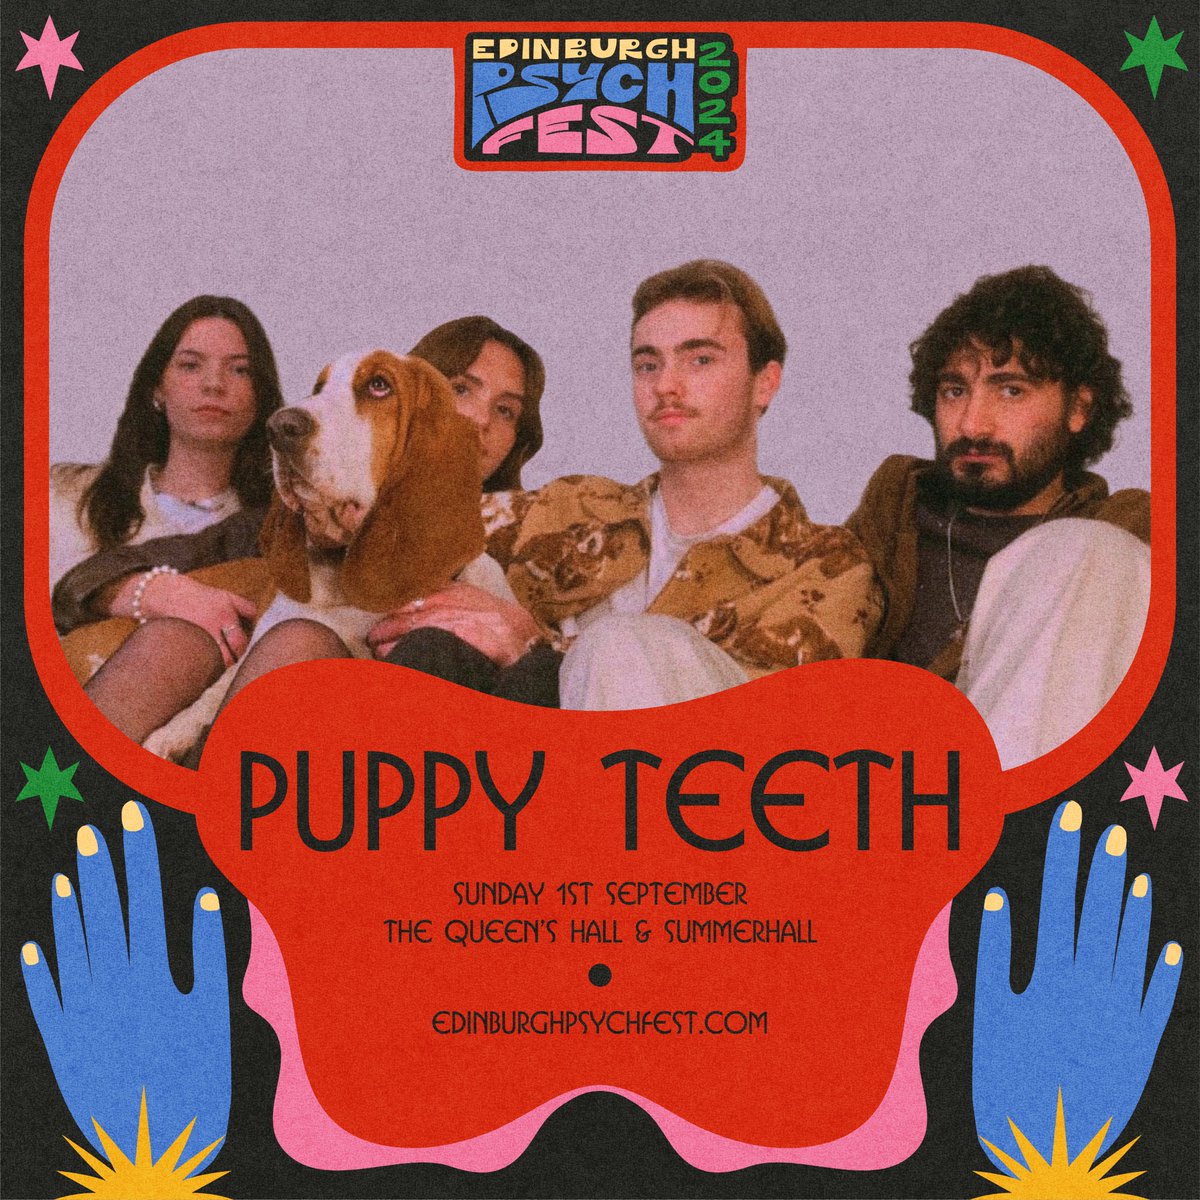 Delighted to have Edinburgh's own @PuppyTeethBand on the bill for EPF2024! edinburghpsychfest.com for tickets.